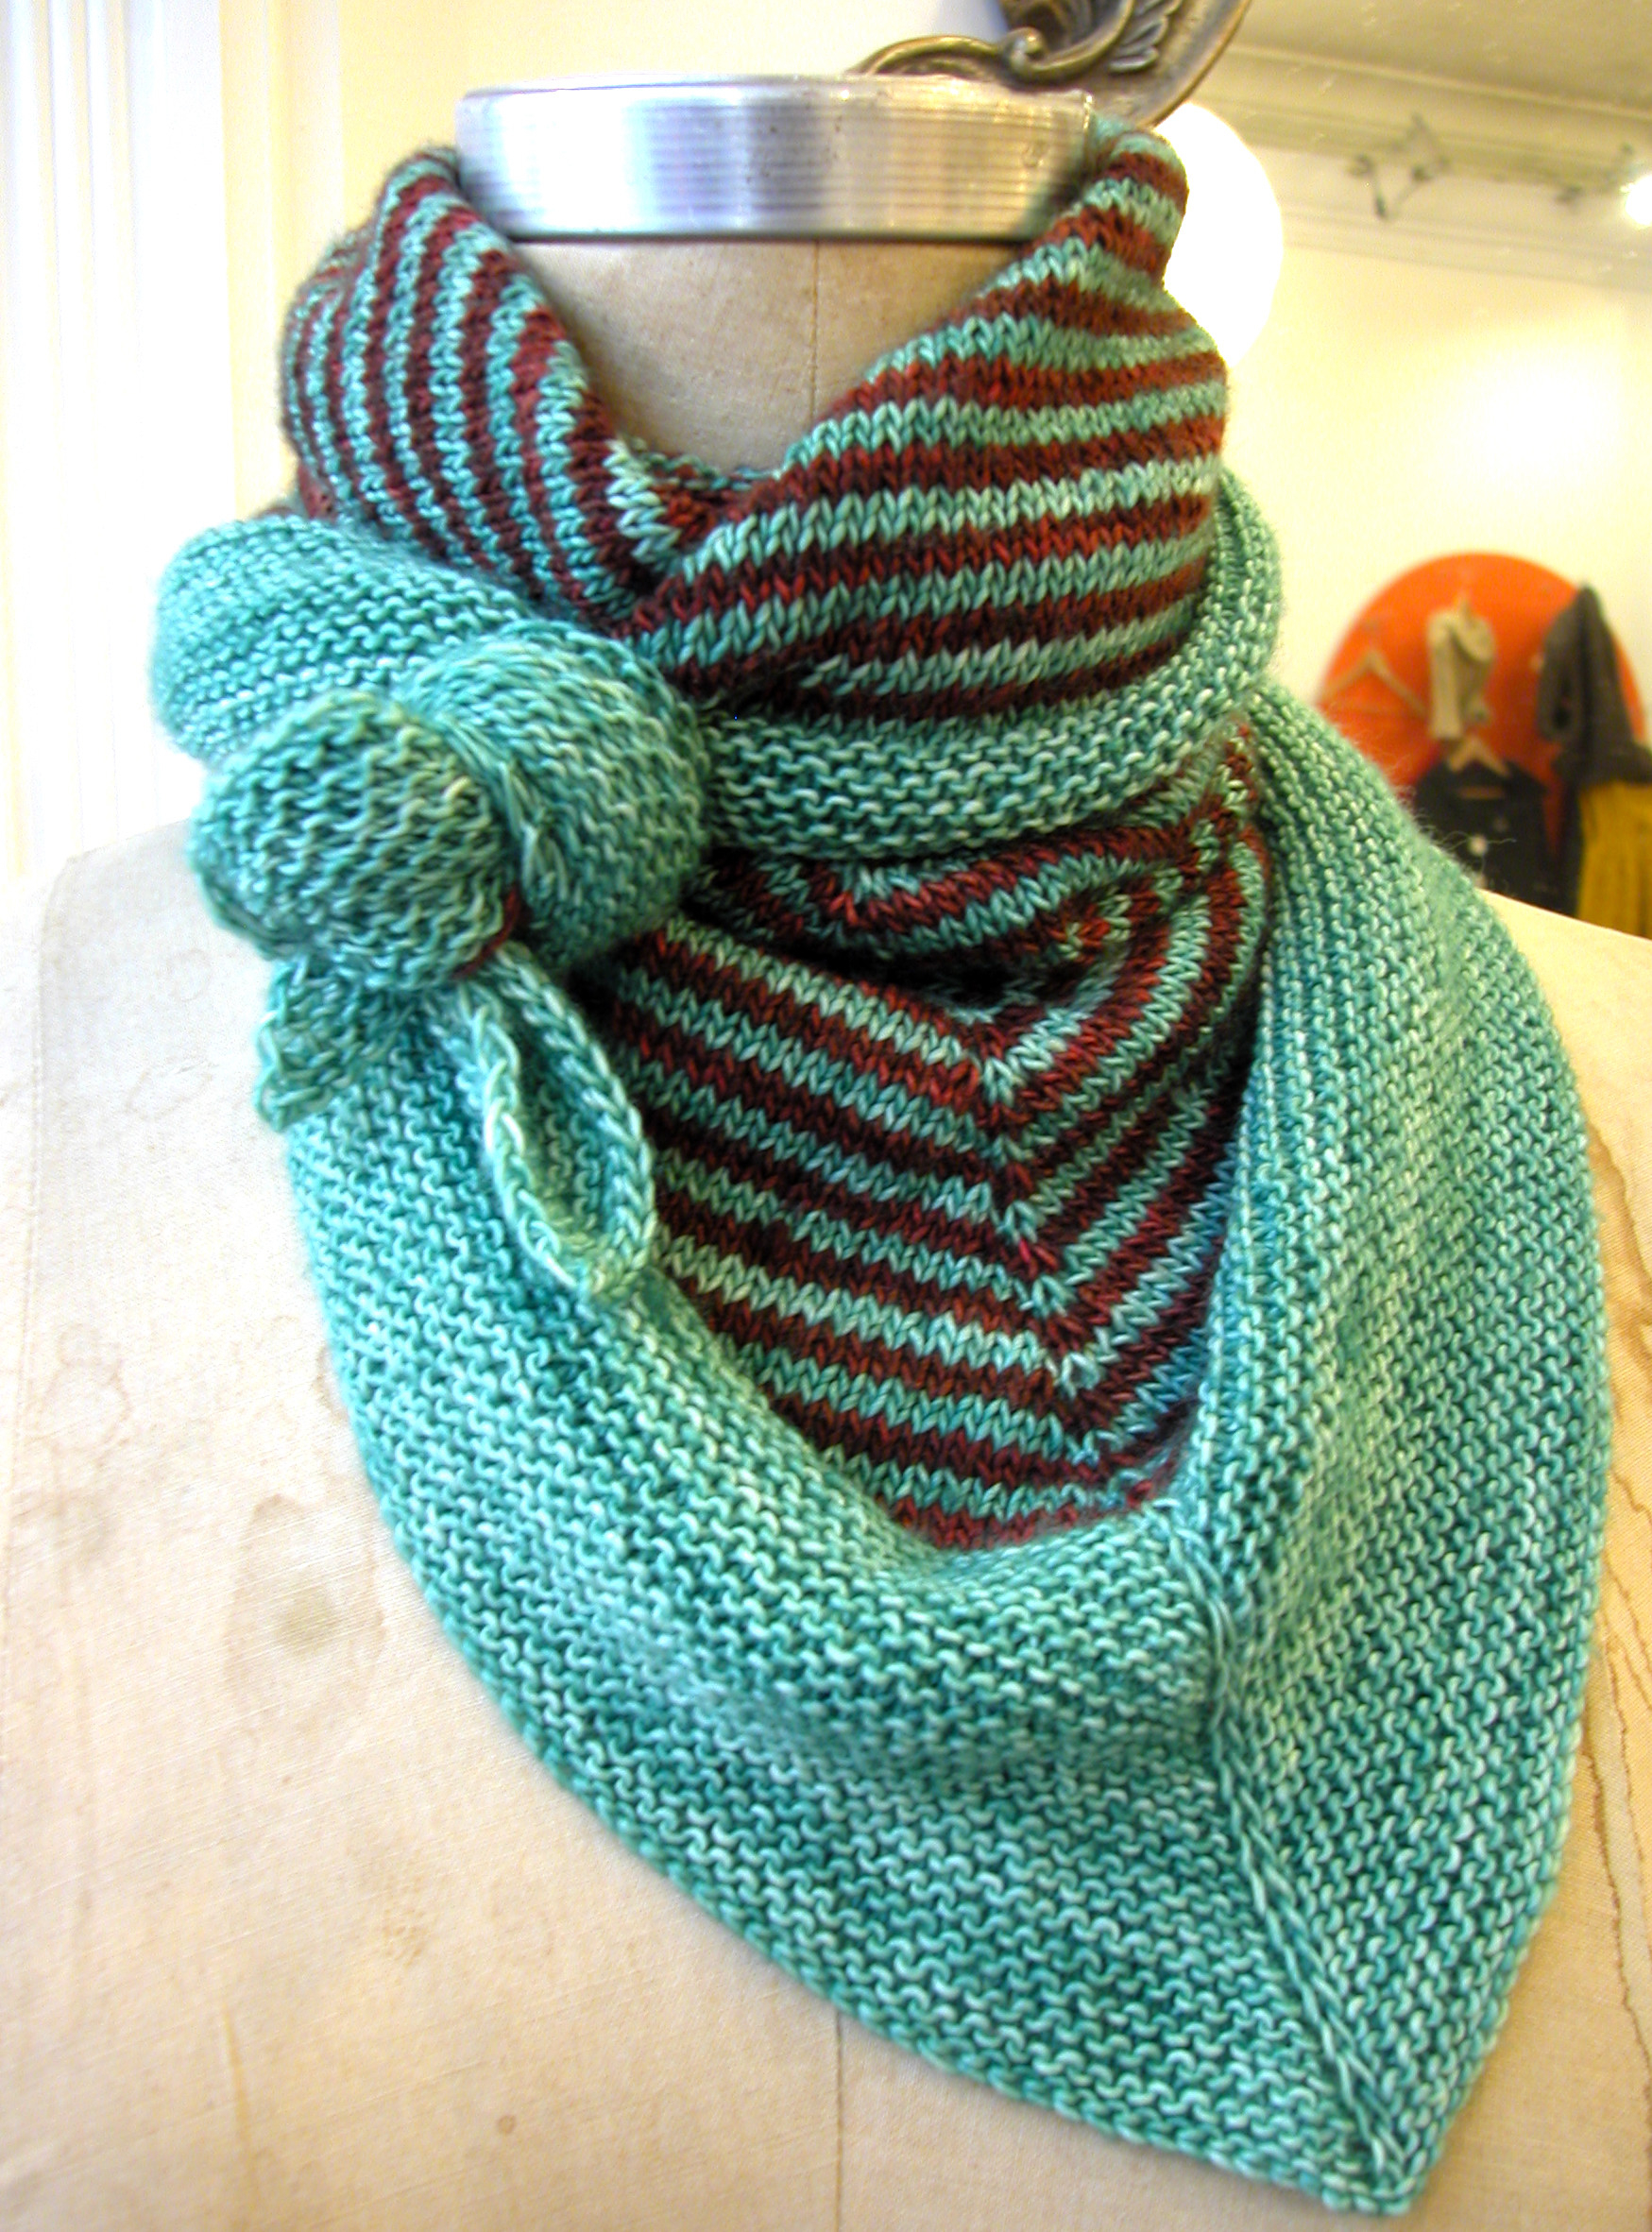 Knitting Scarf Pattern For Beginners Free Triangular Scarf The Knit Cafe